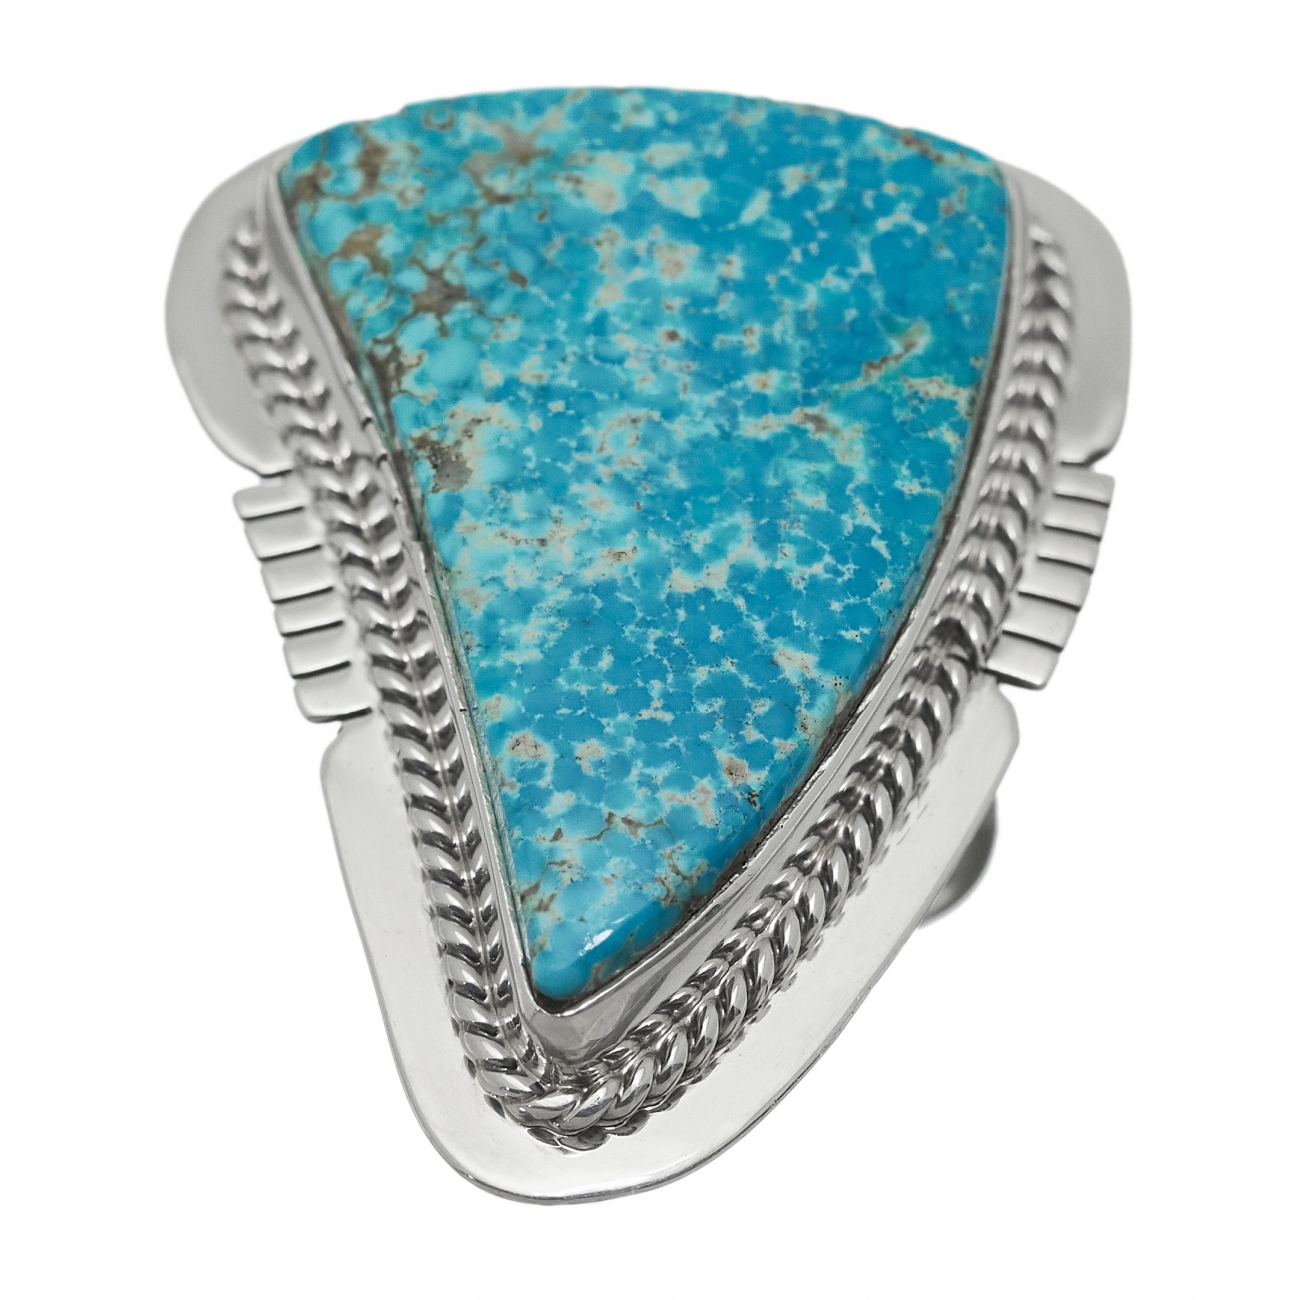 Harpo Navajo ring BA1142 in turquoise and silver